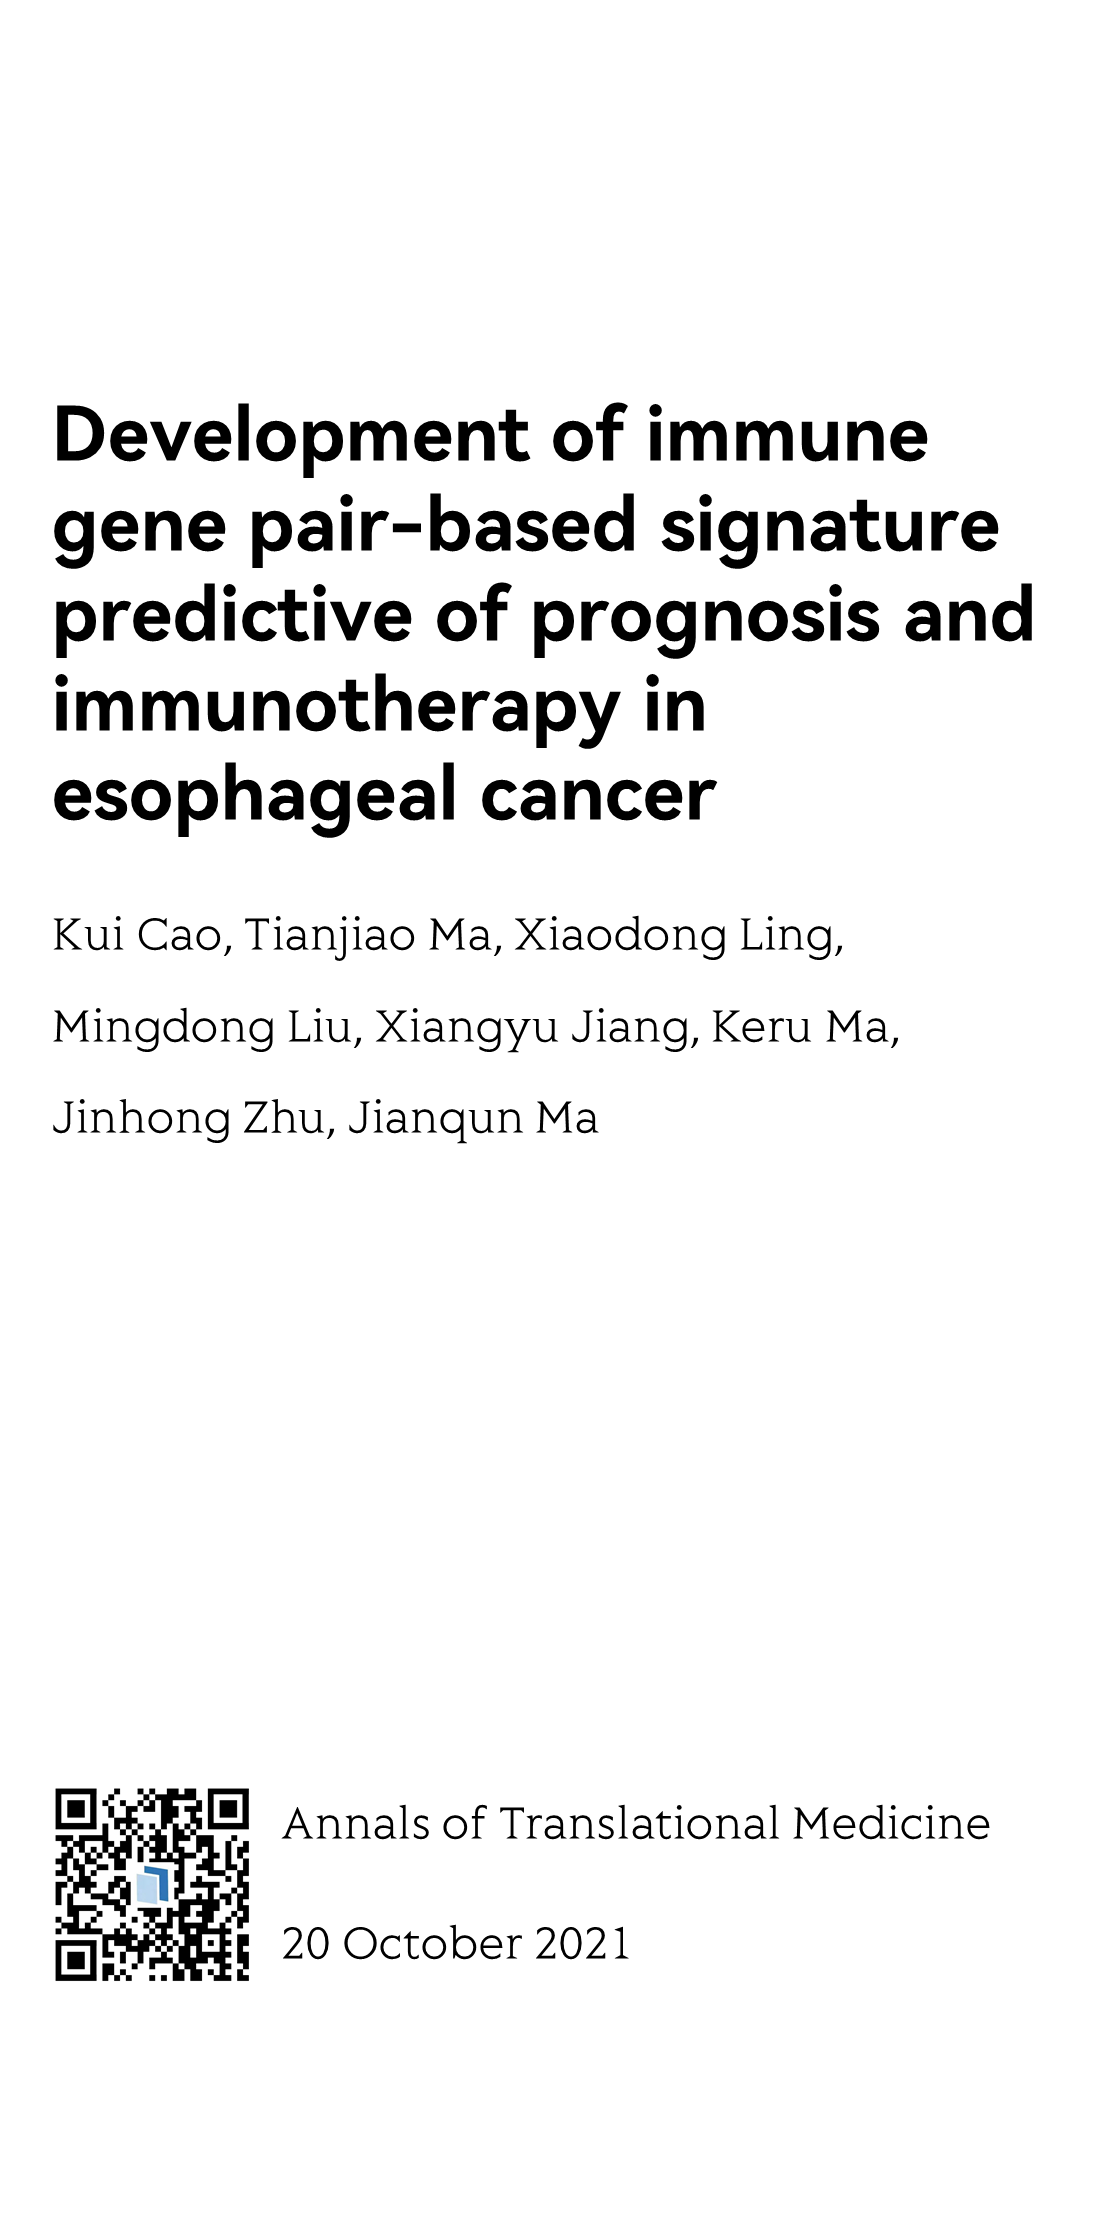 Development of immune gene pair-based signature predictive of prognosis and immunotherapy in esophageal cancer_1